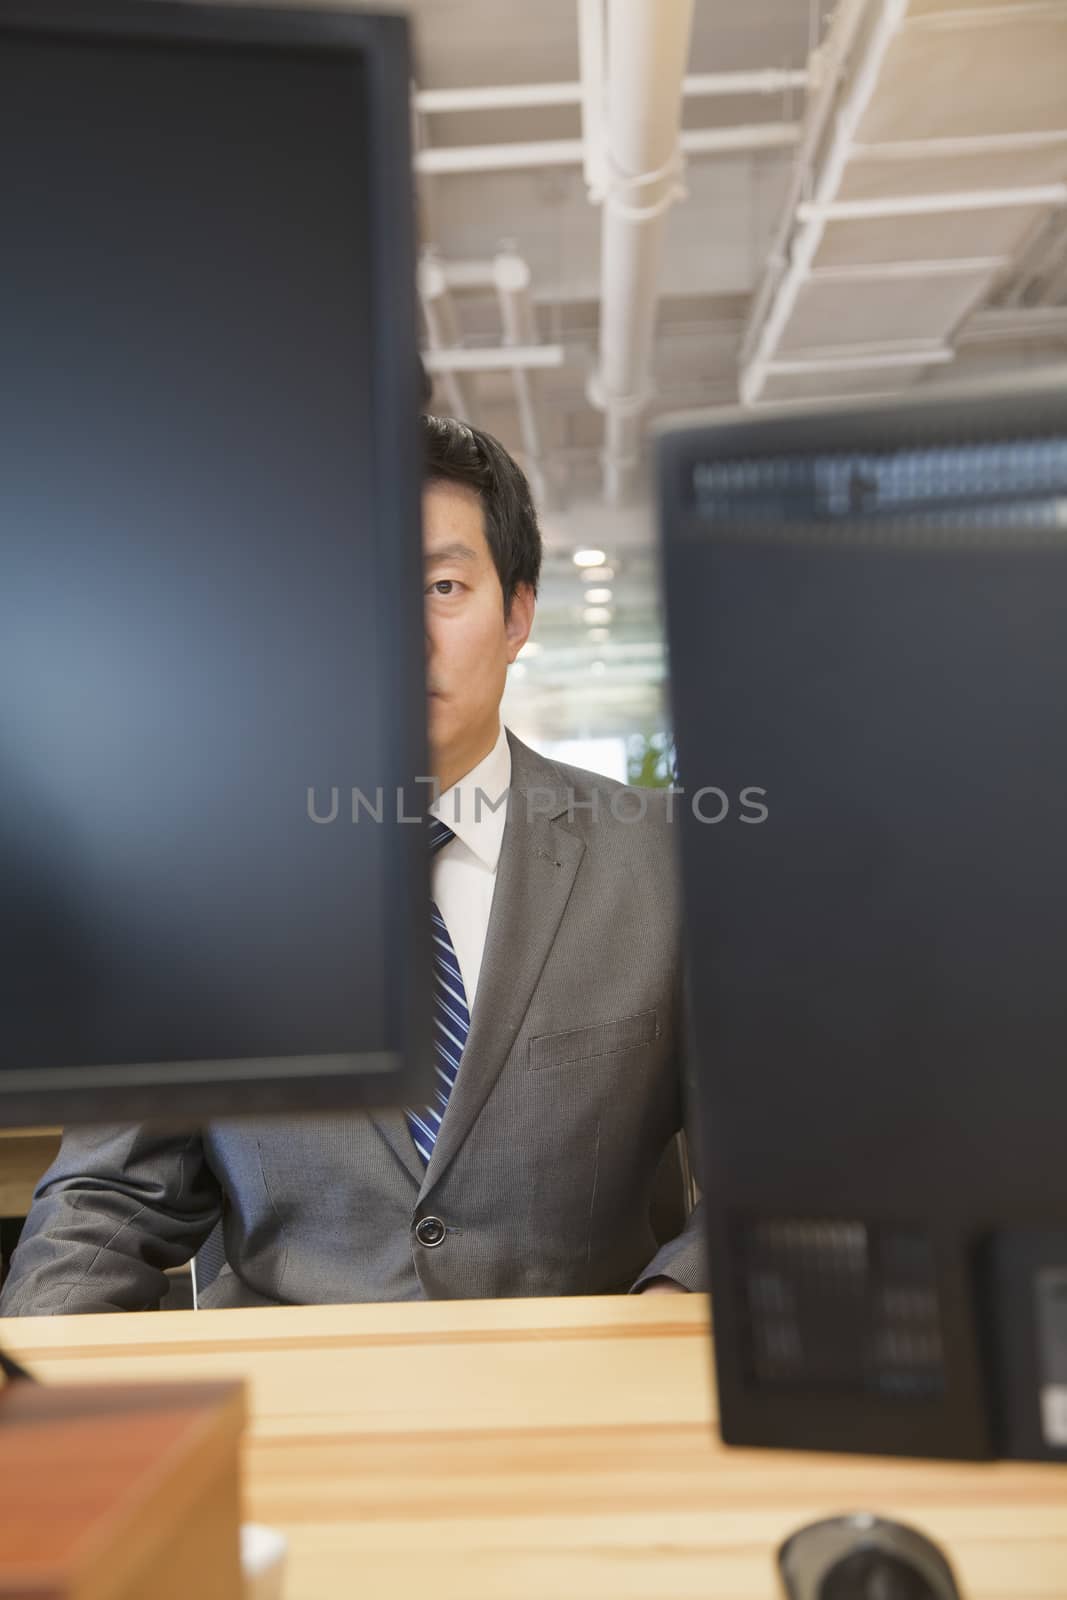 Businessman Looking at Computer in the Office